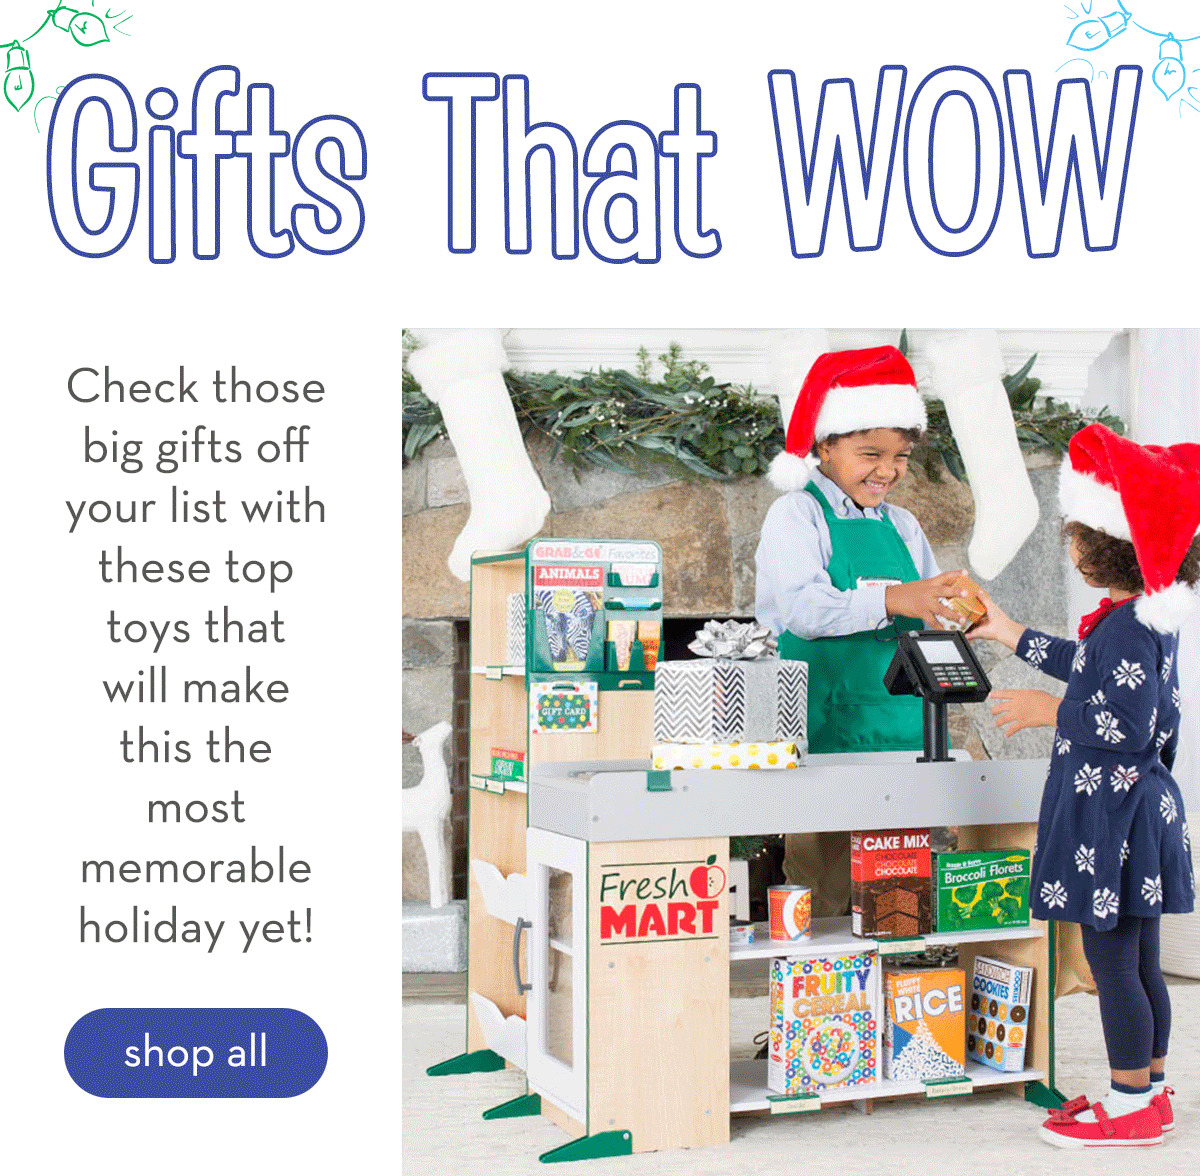 Gifts That Wow - Check those big gifts off your list with these top toys that will make this the most memorable holiday yet! Shop all.